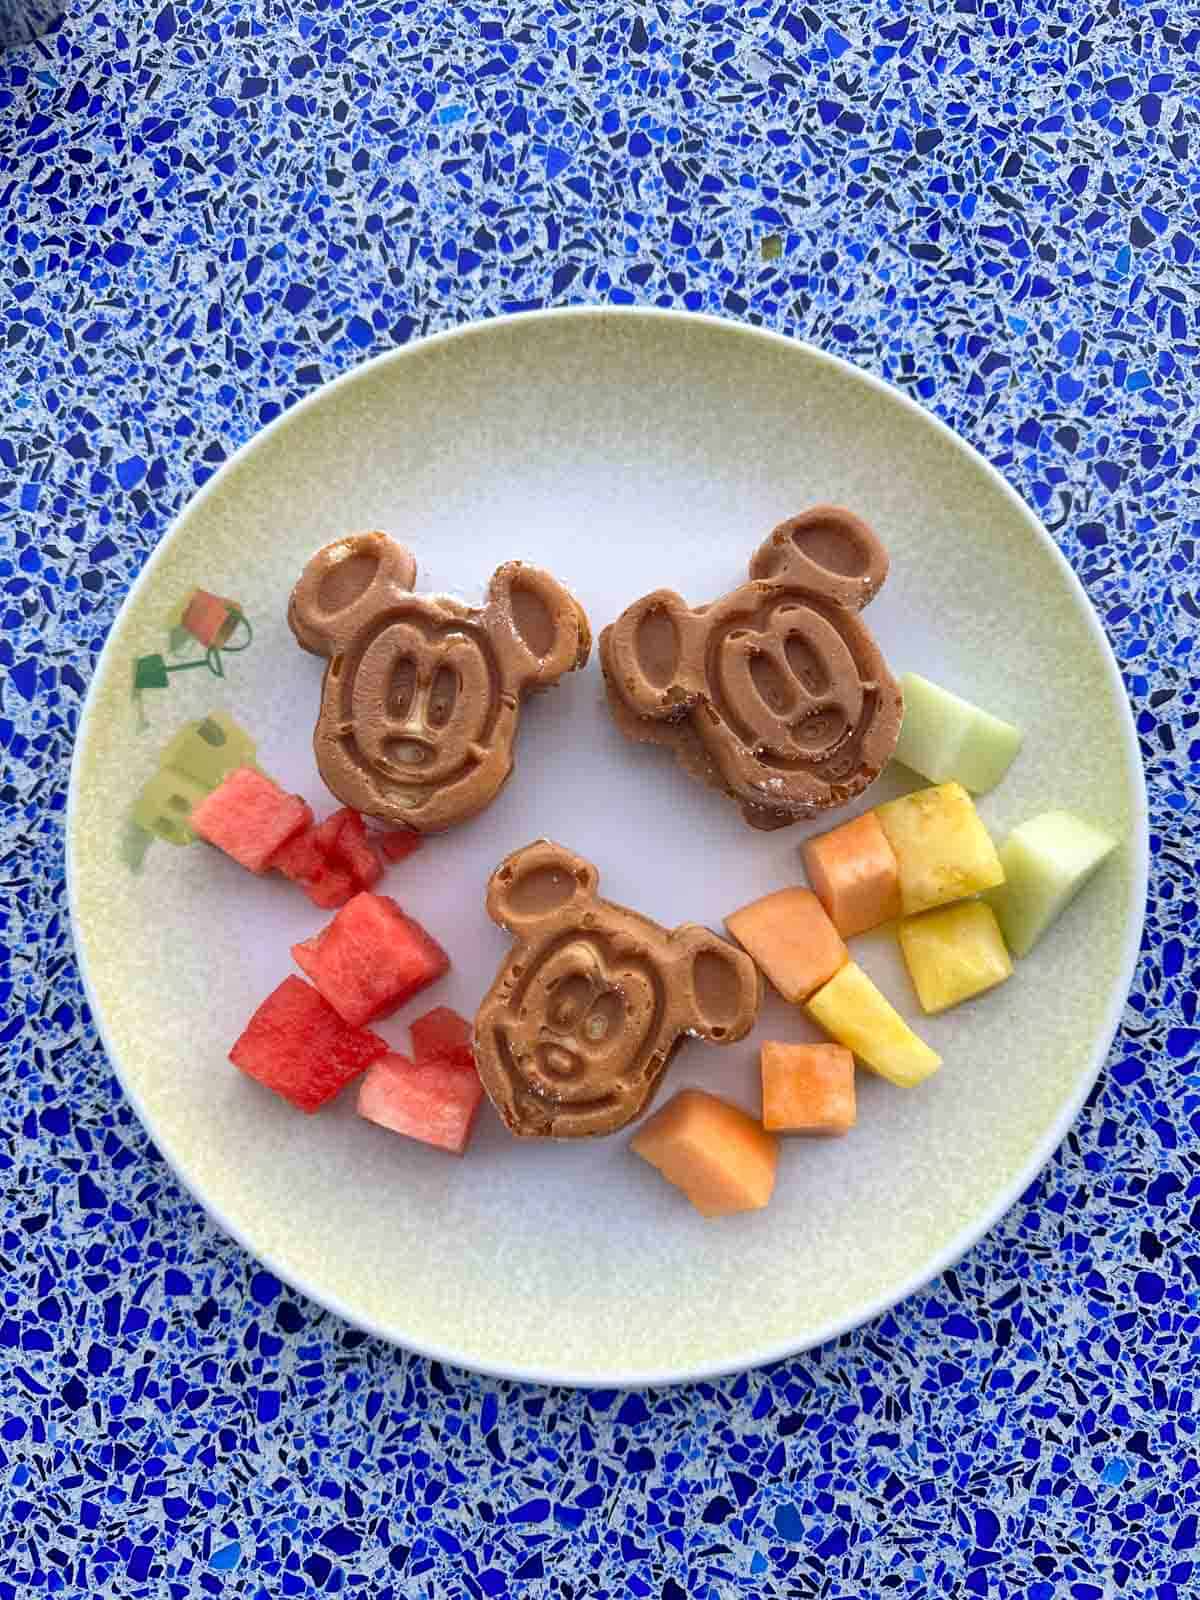 Top view of Mickey Mouse shaped waffles on white plate with fruit on it too.